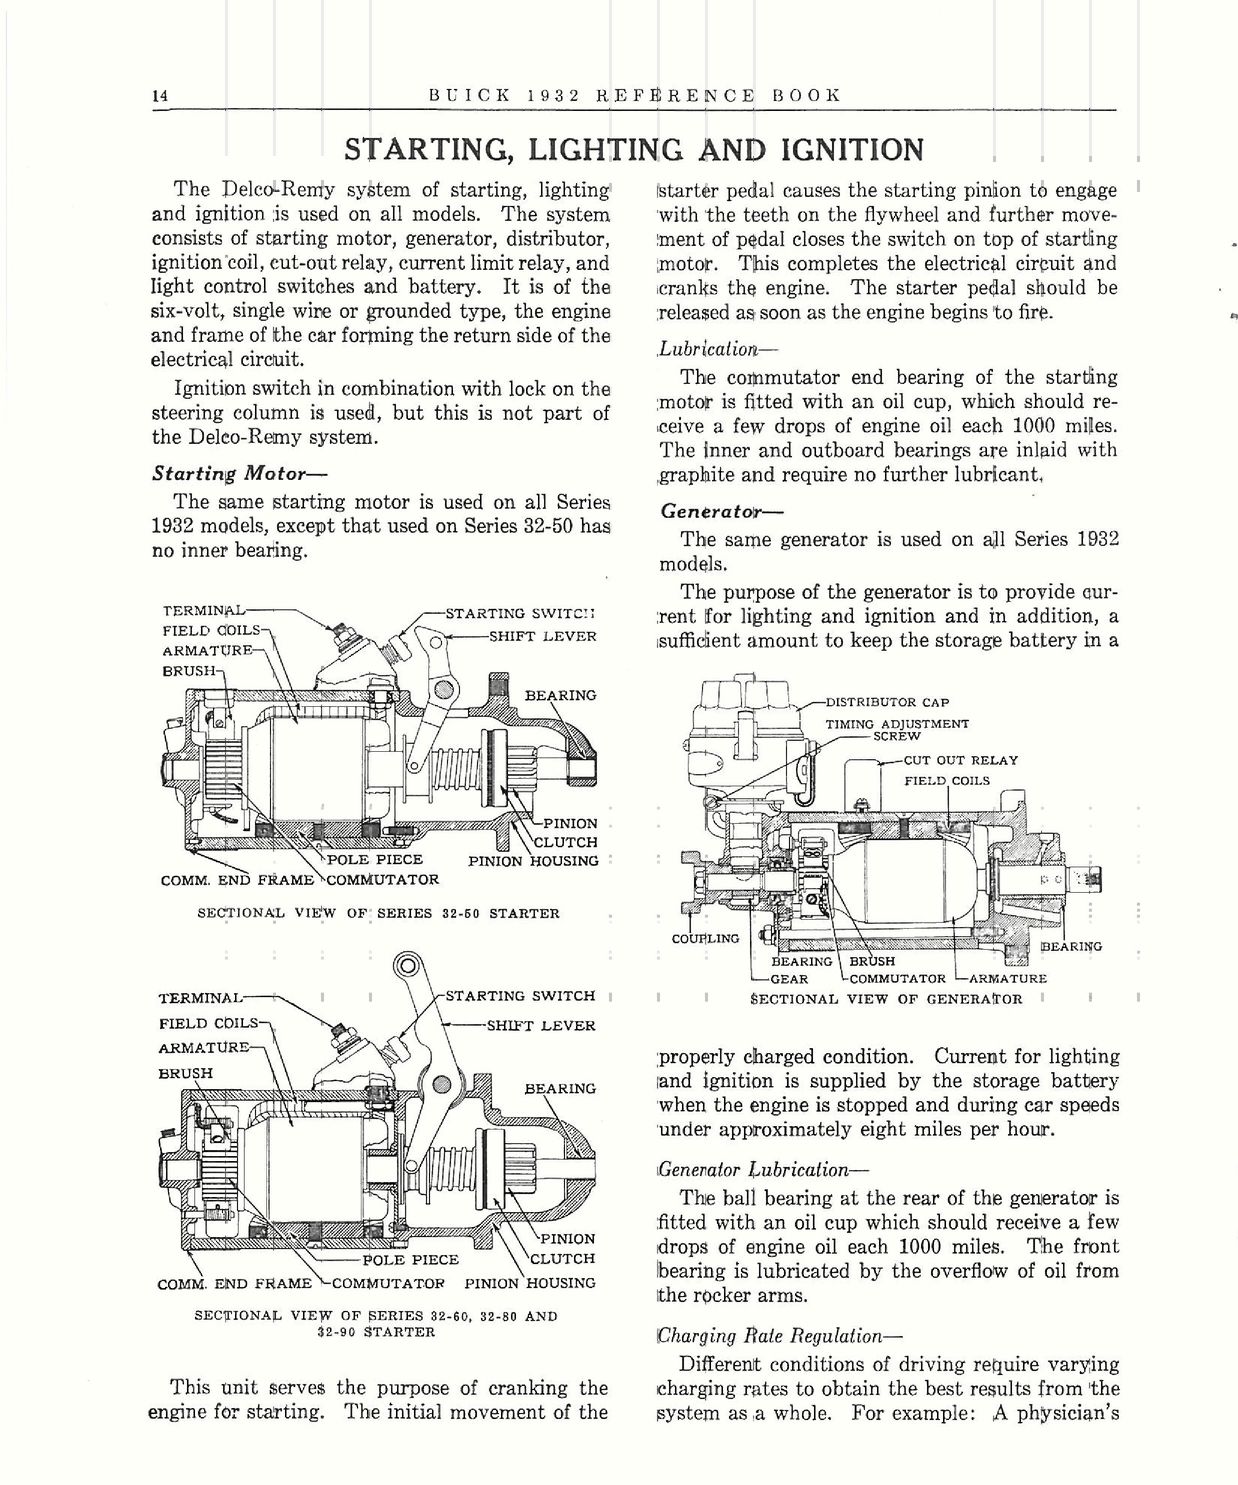 n_1932 Buick Reference Book-14.jpg